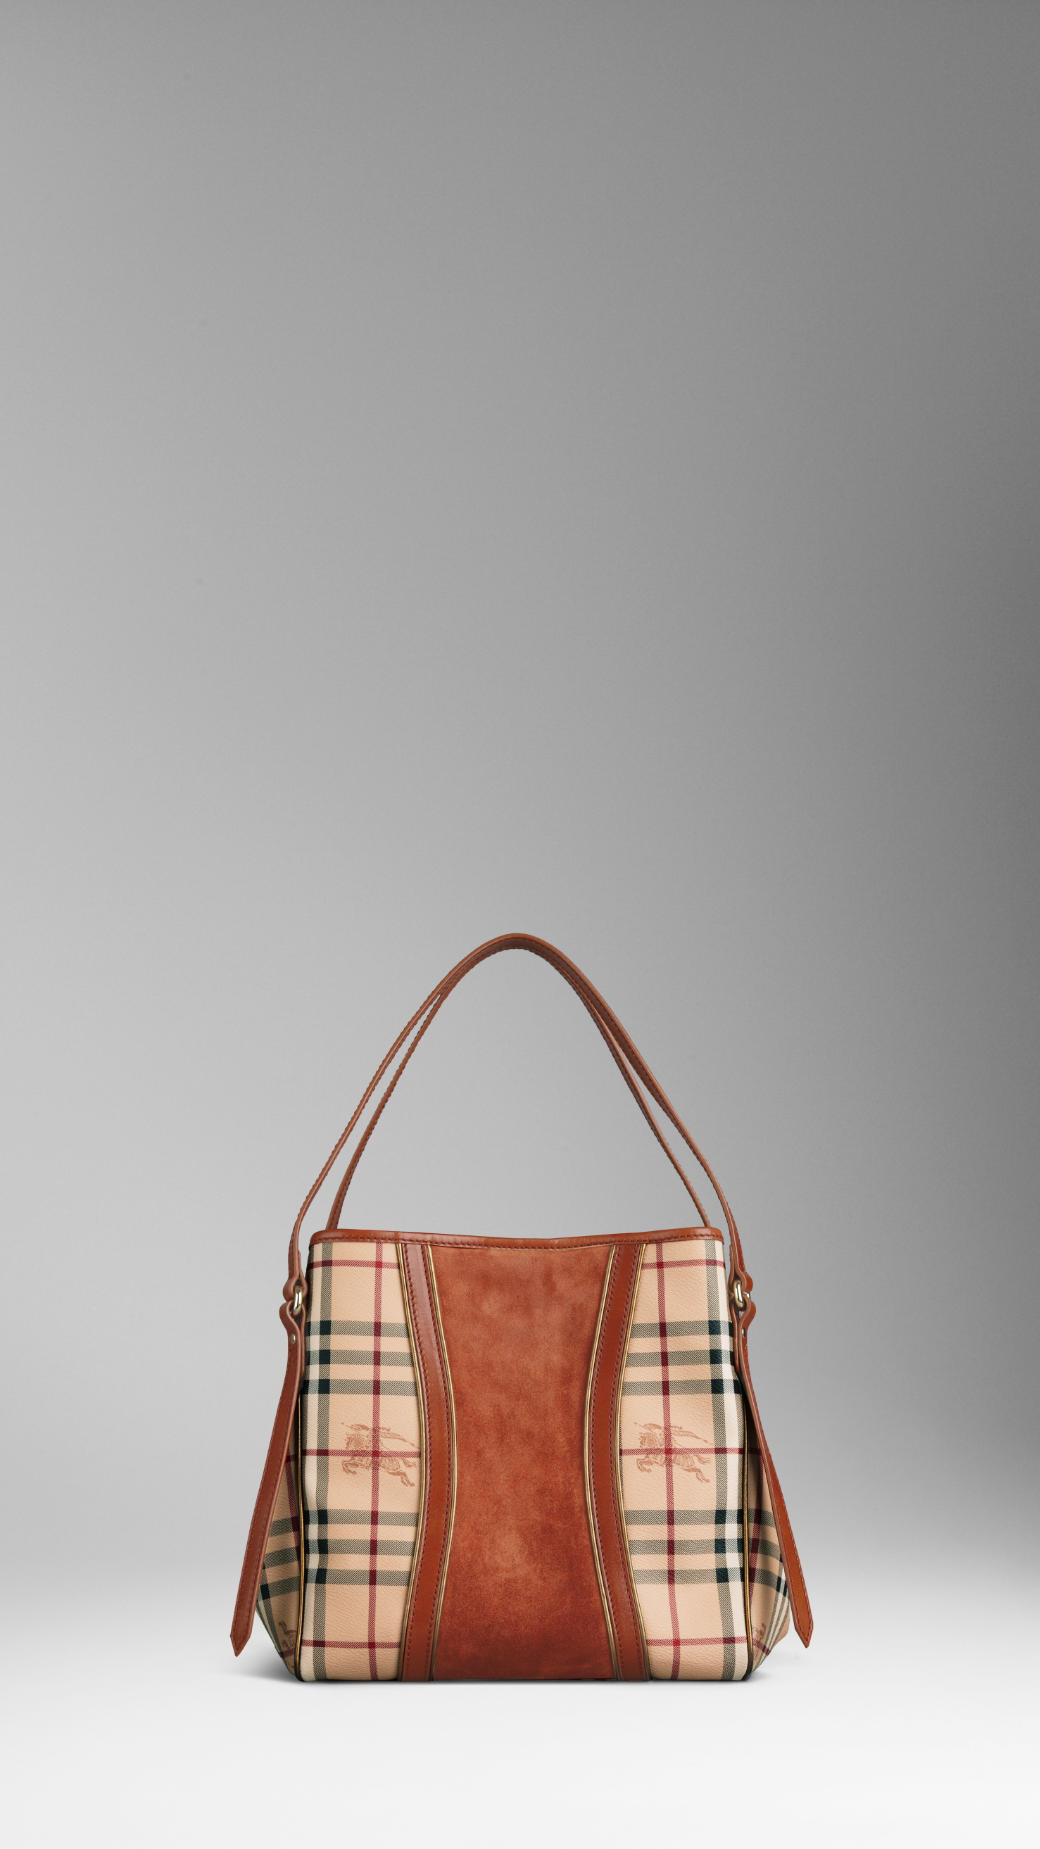 Burberry Small Haymarket Suede Panel Tote Bag in Brown - Lyst